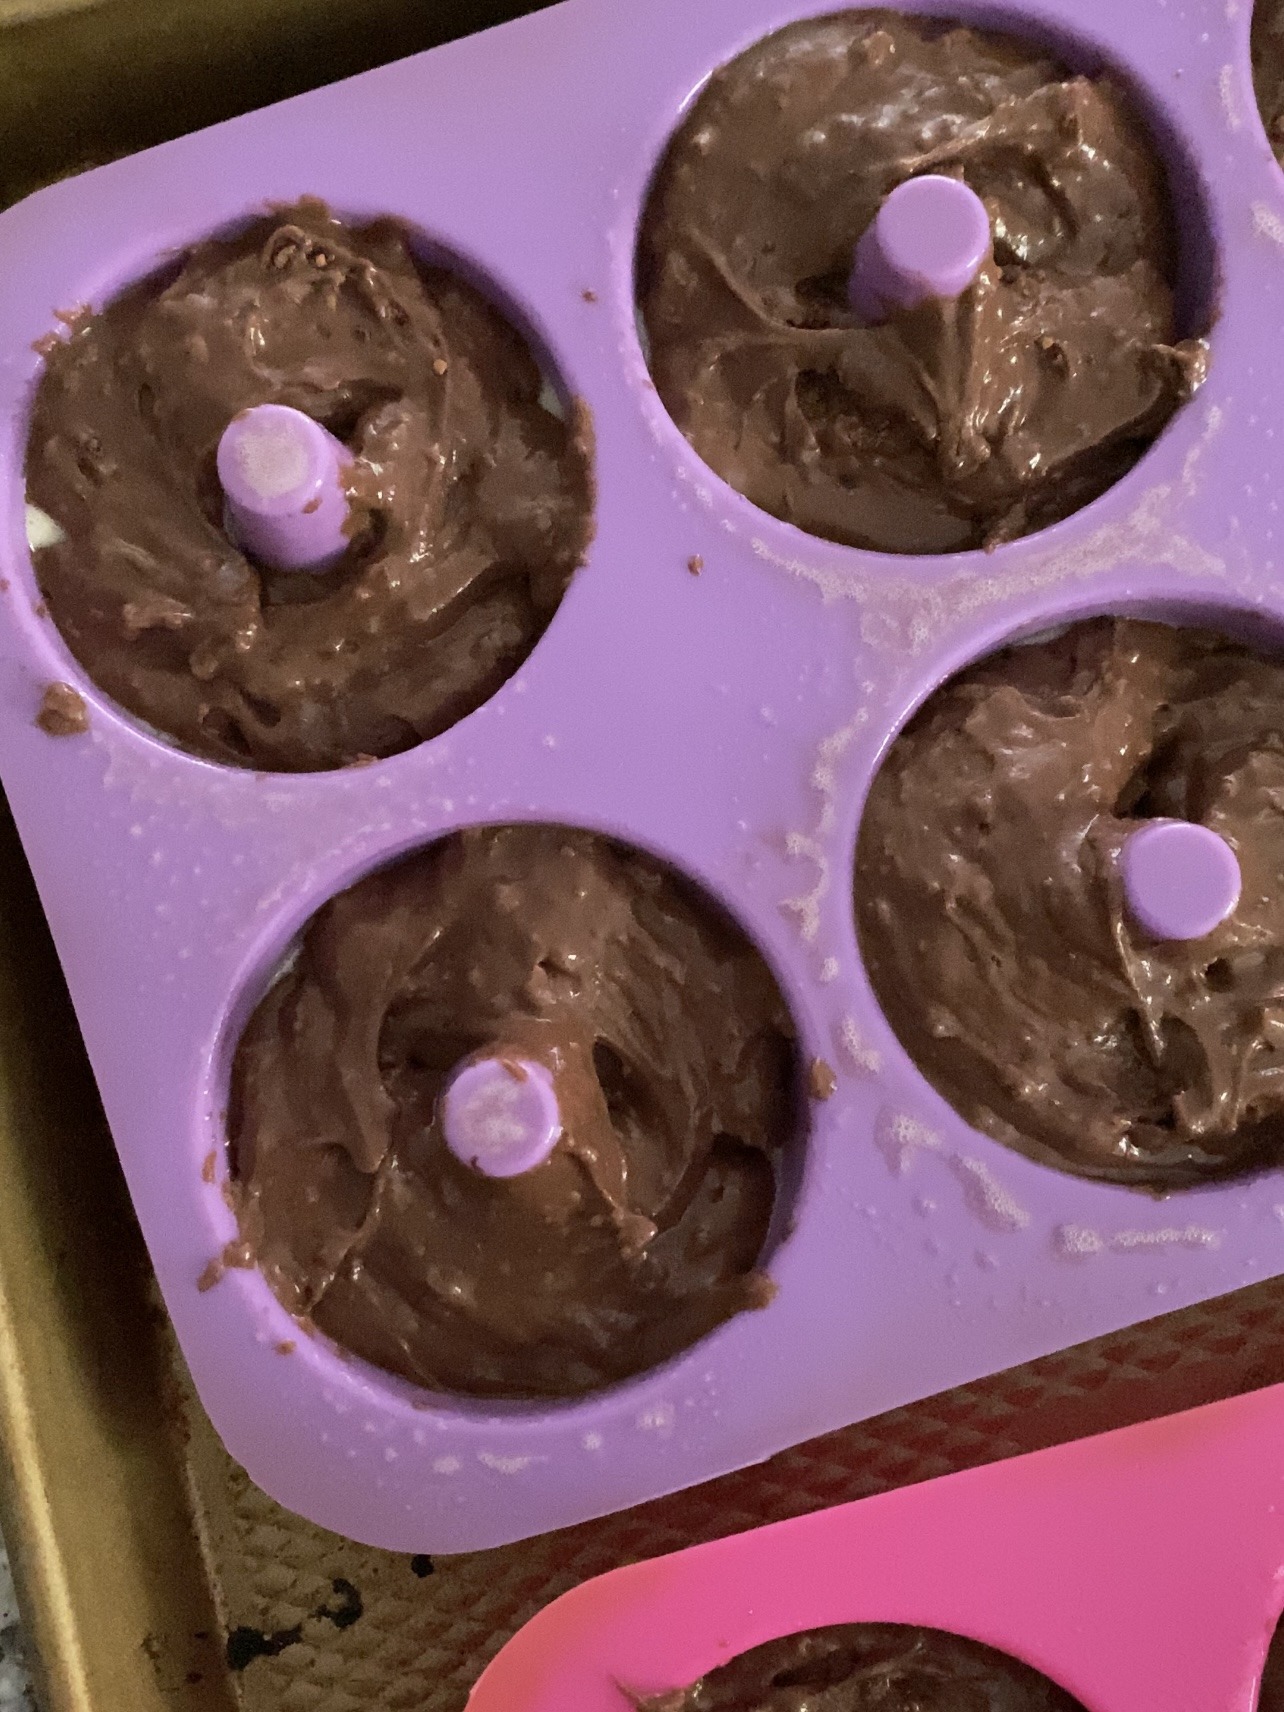 Chocolate donut batter in silicone molds.